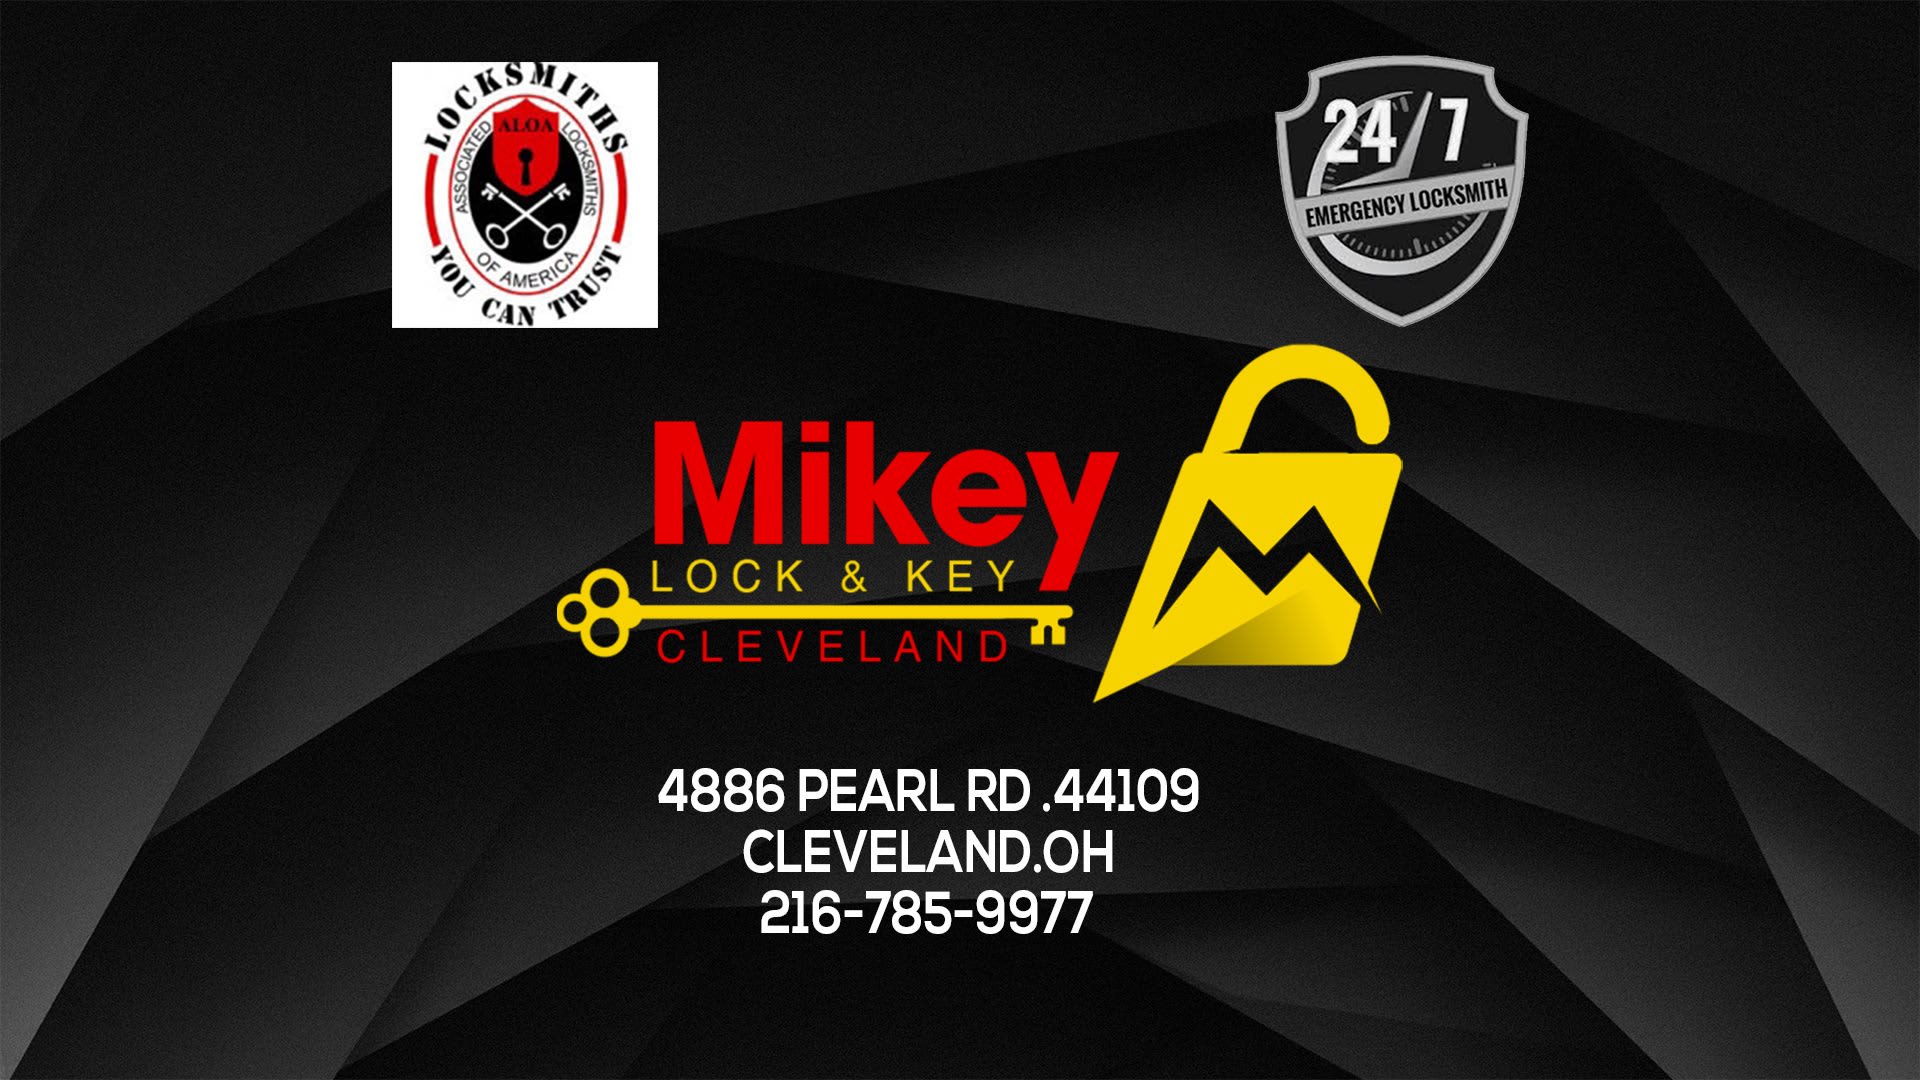 Mikey Lock and Key Cleveland